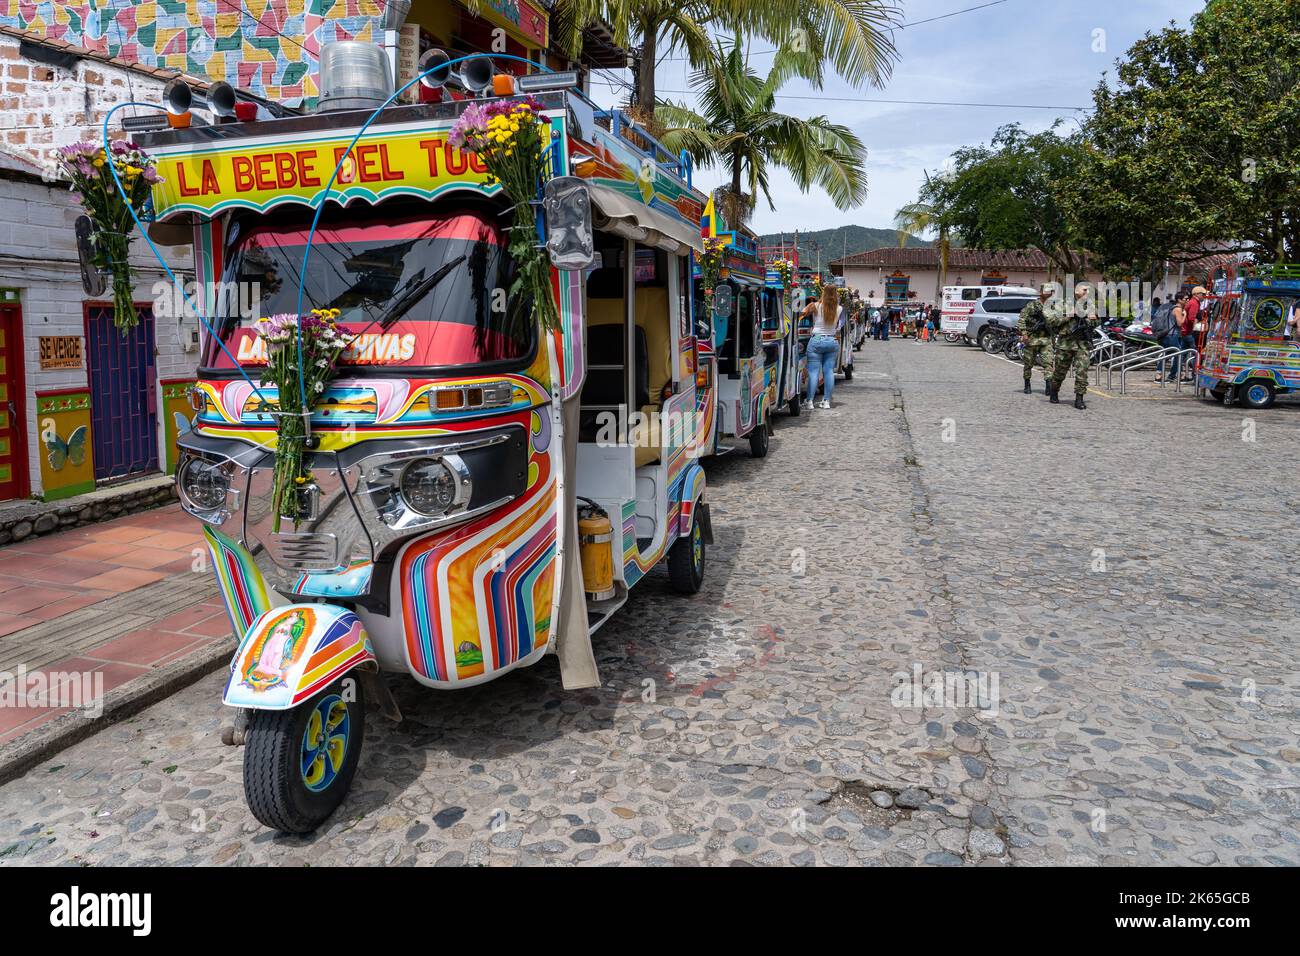 A colorful motorcycle taxi in the street with trees and people in the background, Guatape, Colombia Stock Photo